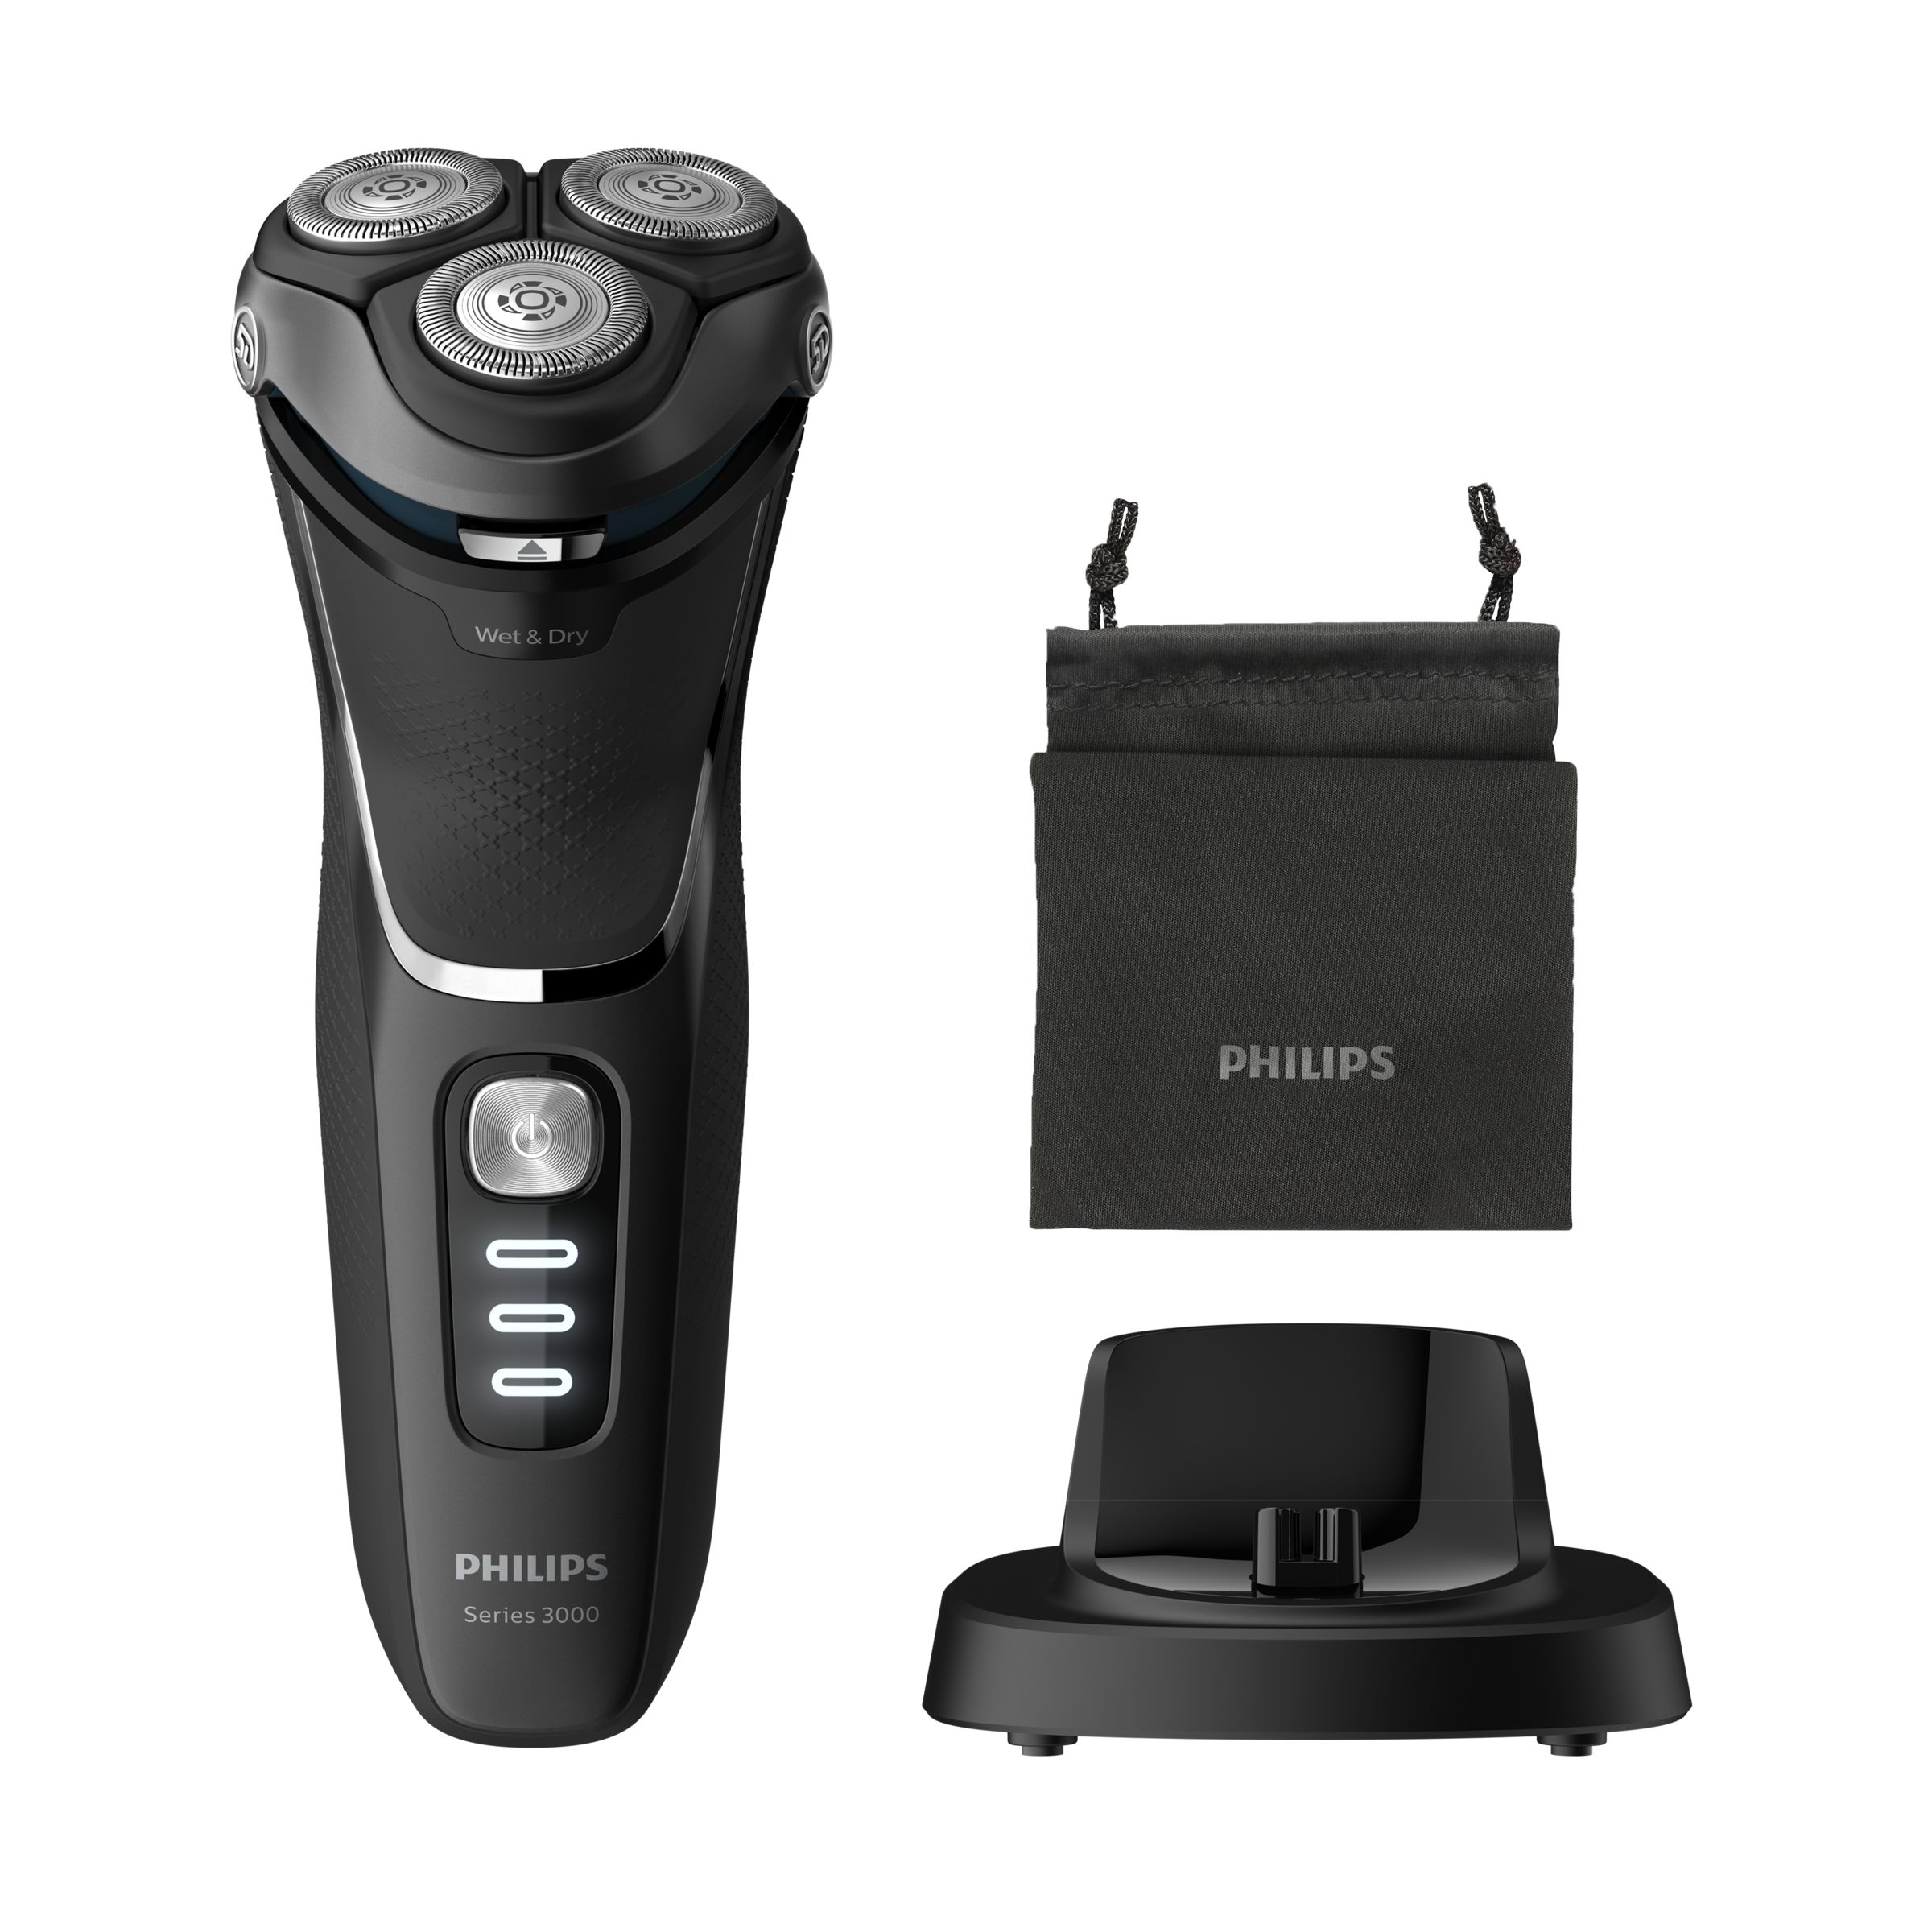 Image of Philips Shaver 3300 - Wet or Dry electric shaver, Series 3000 - S3332/54